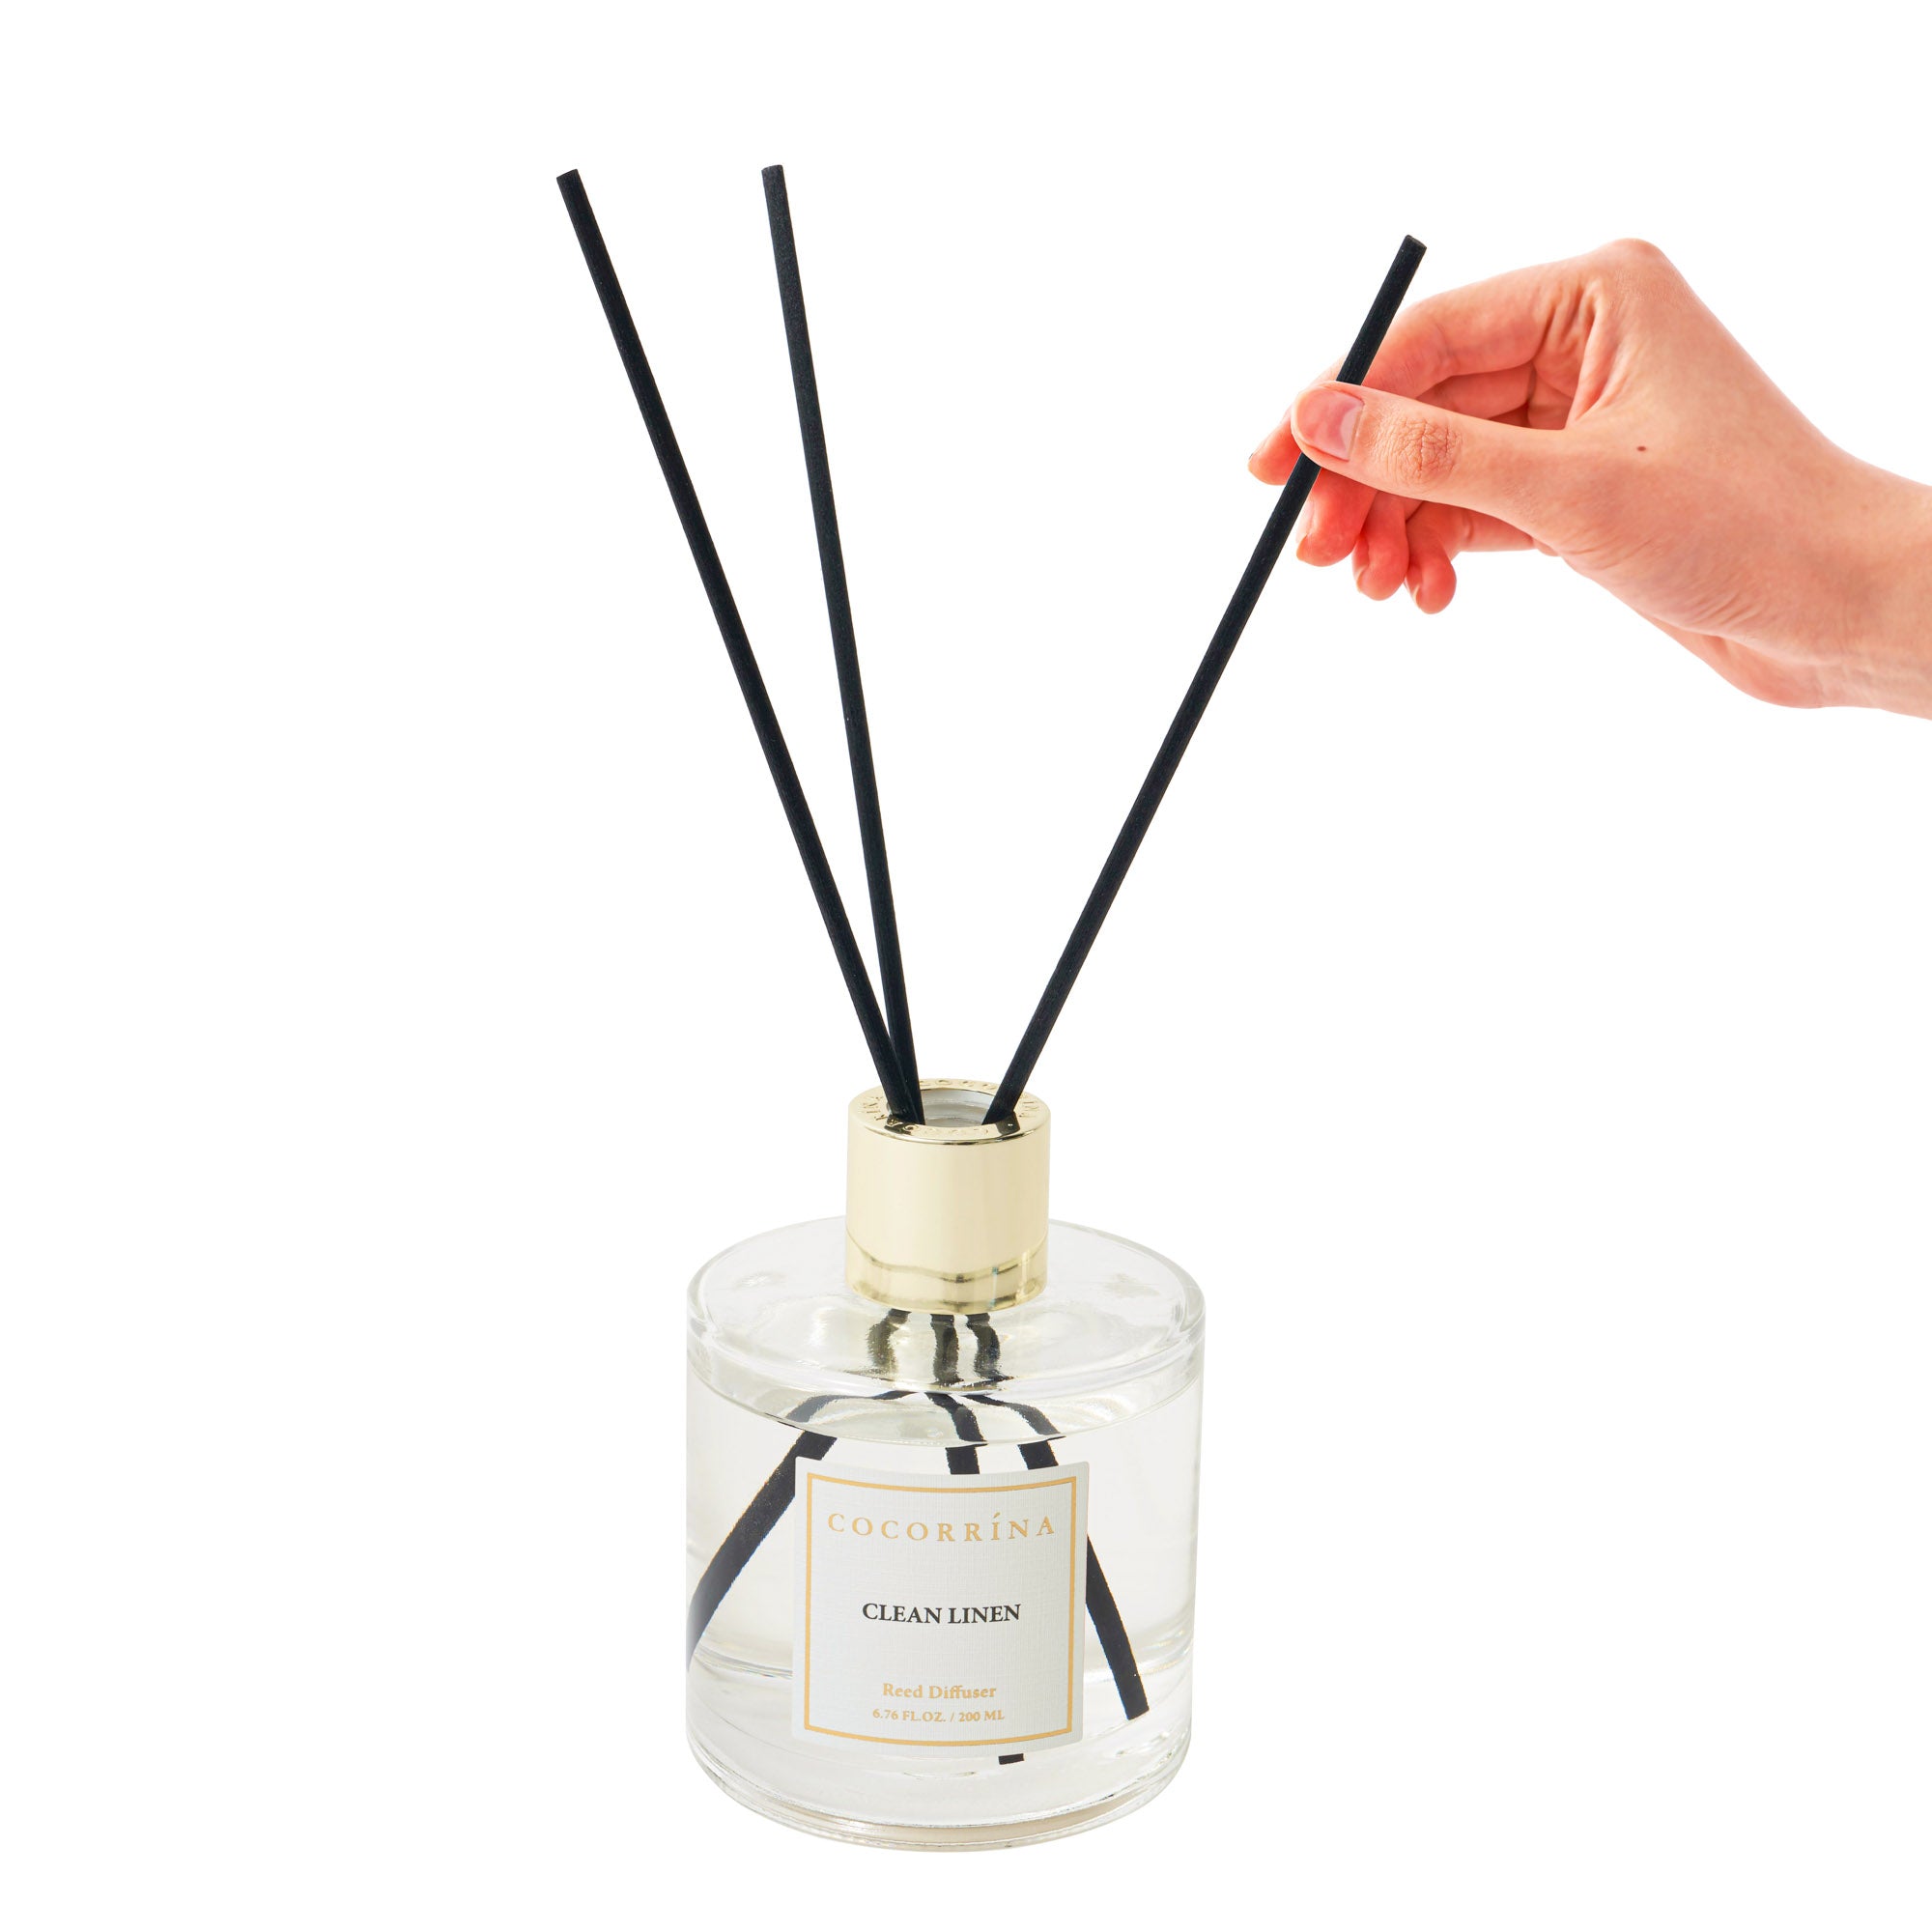 COCORRÍNA Clean Linen Flower Reed Diffuser